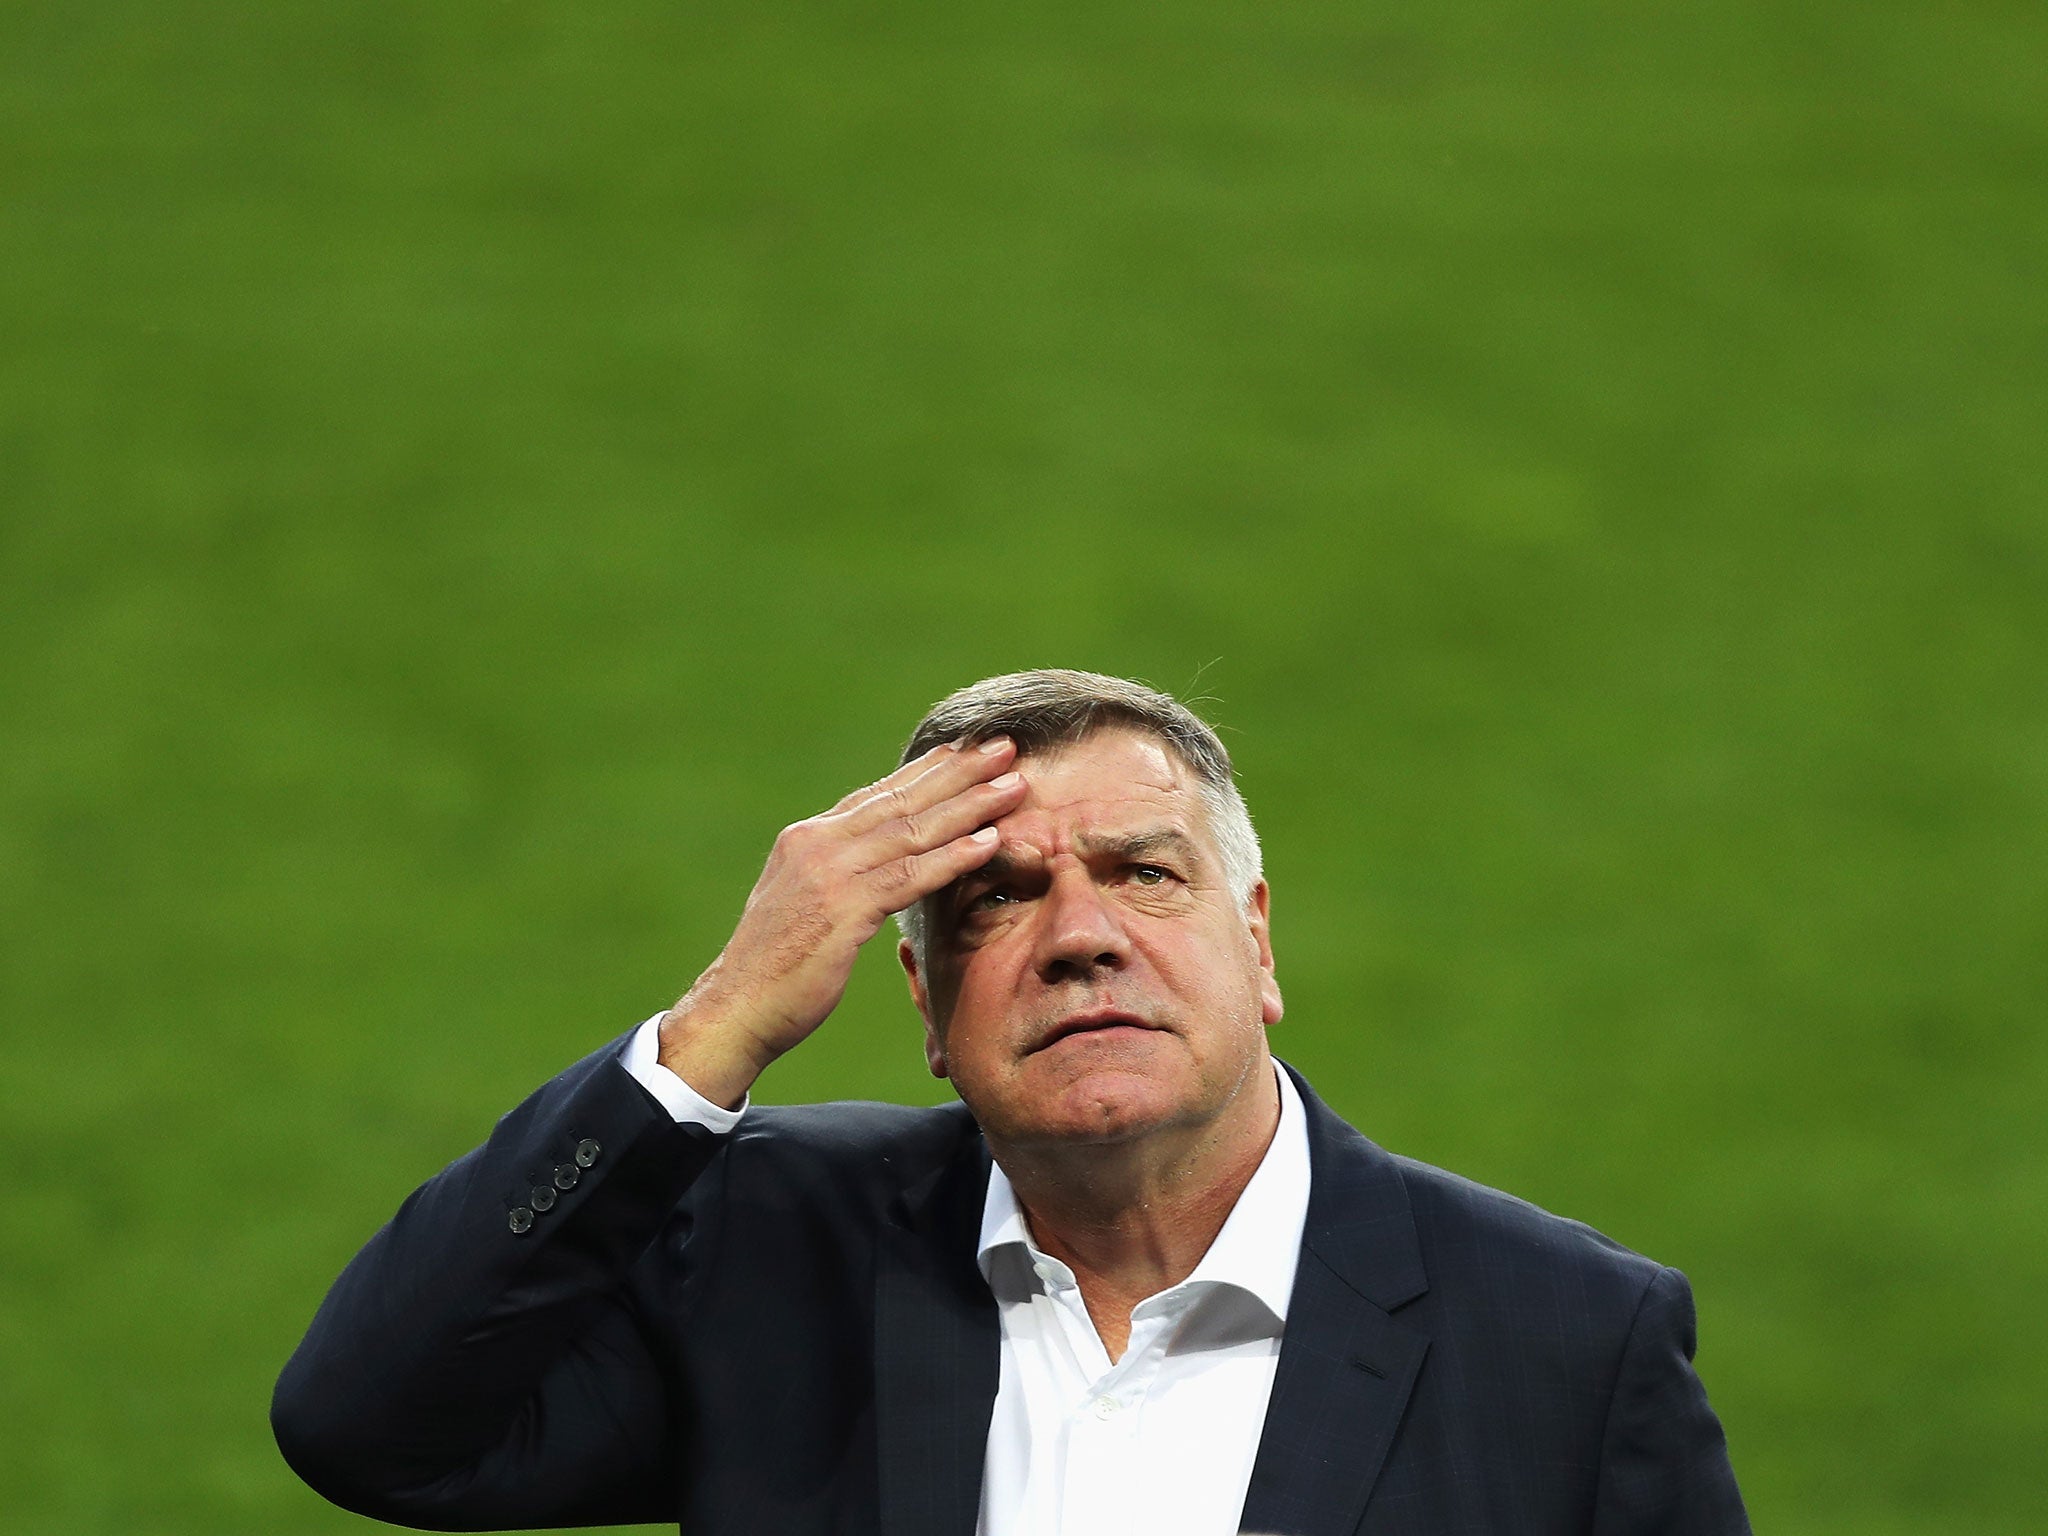 Sam Allardyce left his role as England manager this week